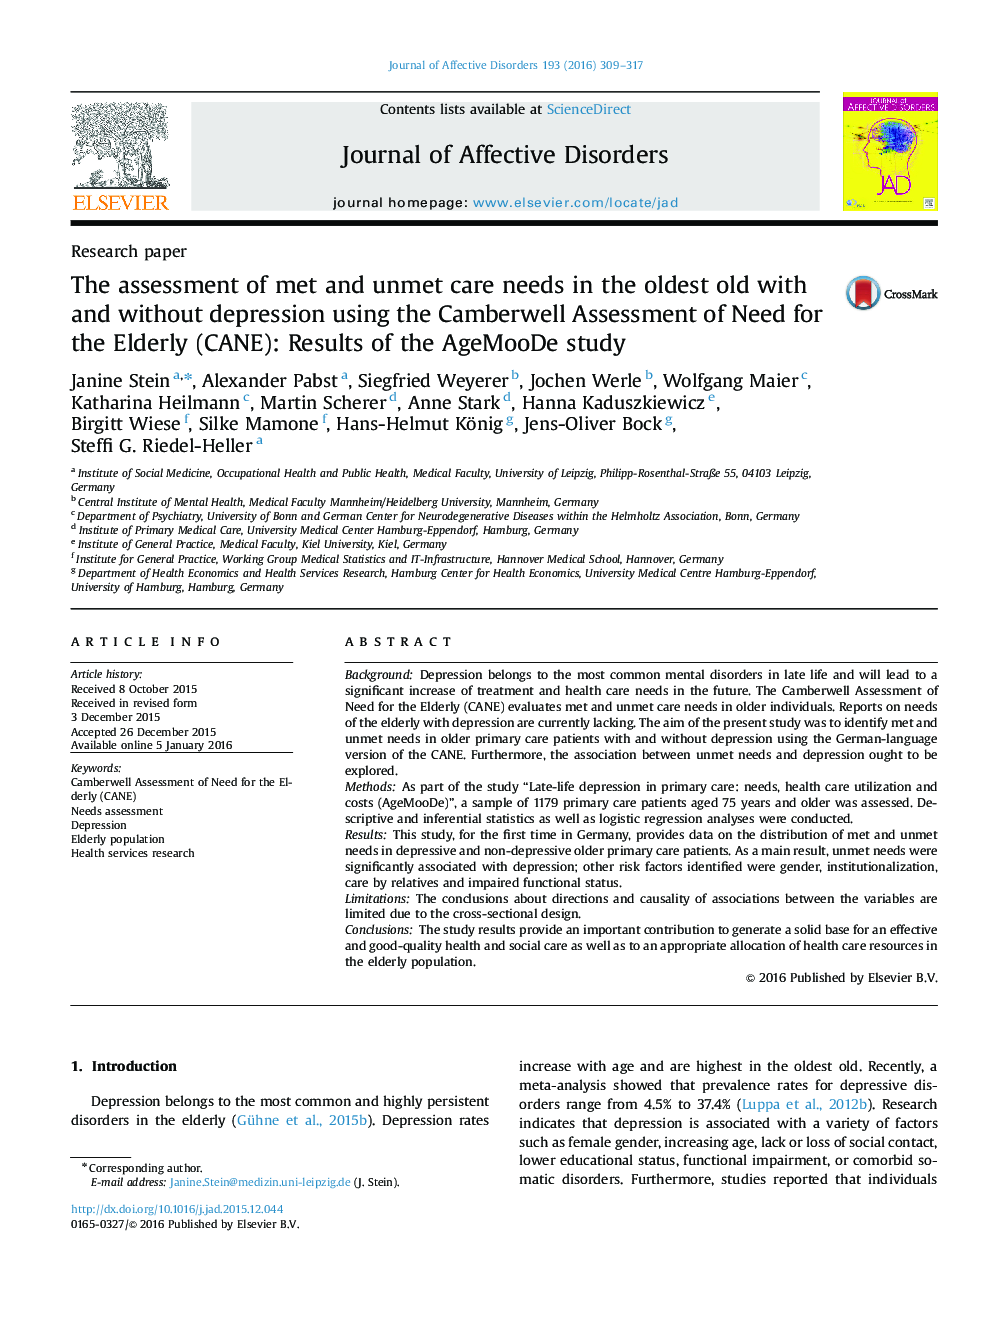 The assessment of met and unmet care needs in the oldest old with and without depression using the Camberwell Assessment of Need for the Elderly (CANE): Results of the AgeMooDe study